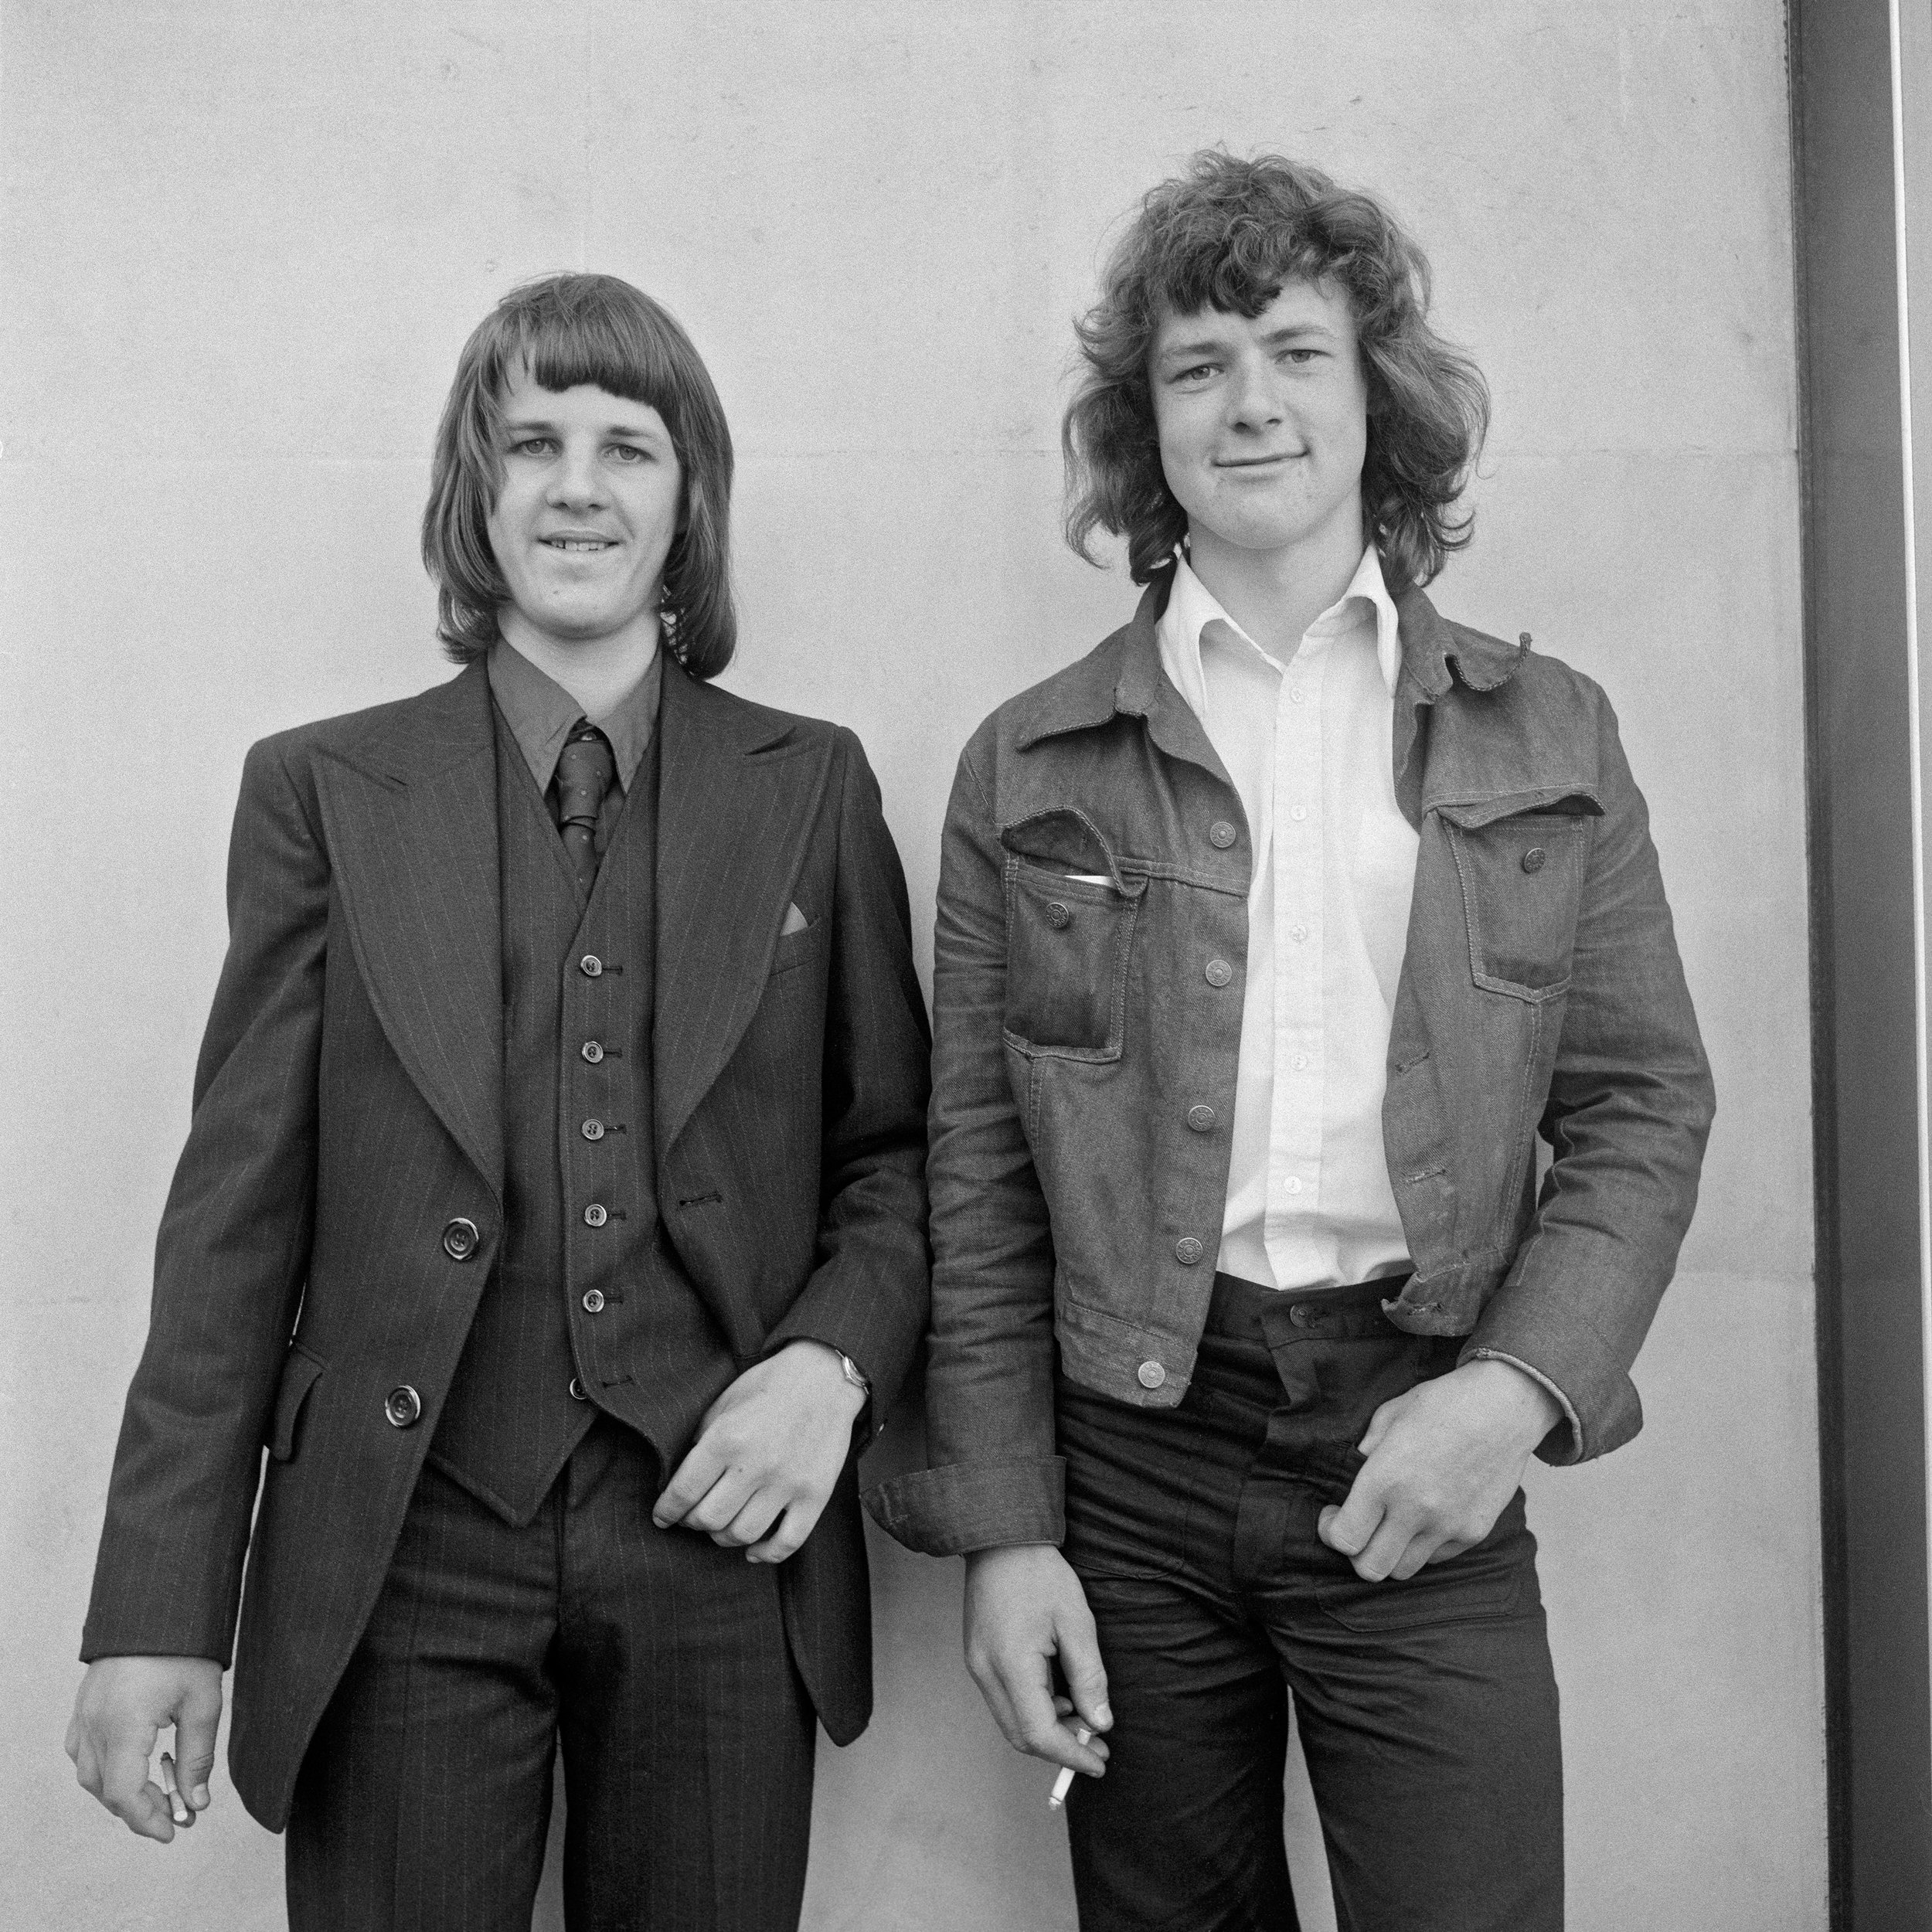  Double portrait from the Free Photographic Omnibus, David Leigh and Tommy Kemp, Southampton.&nbsp; May 1974 ©Daniel Meadows 